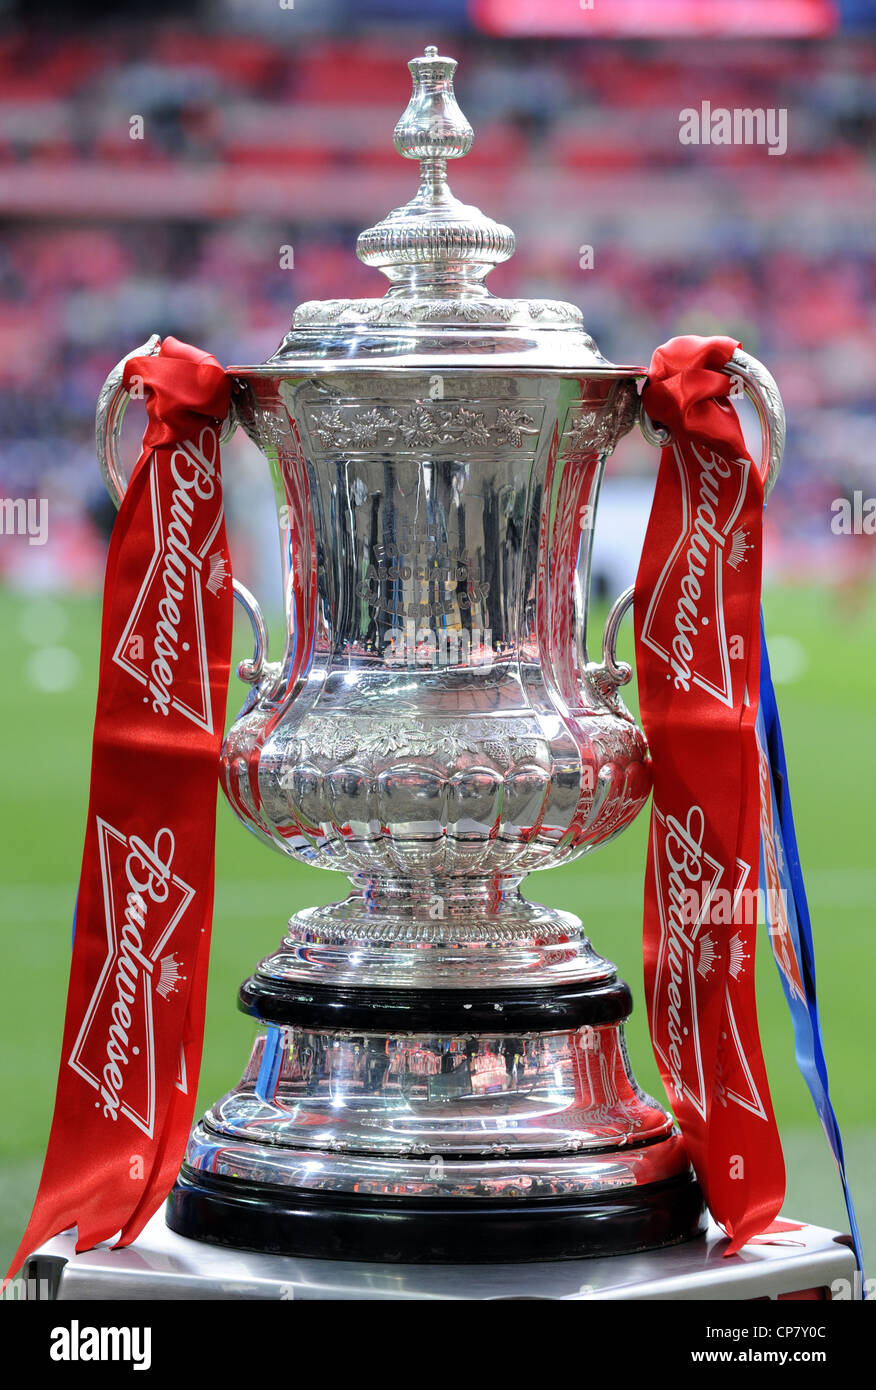 fa cup trophy